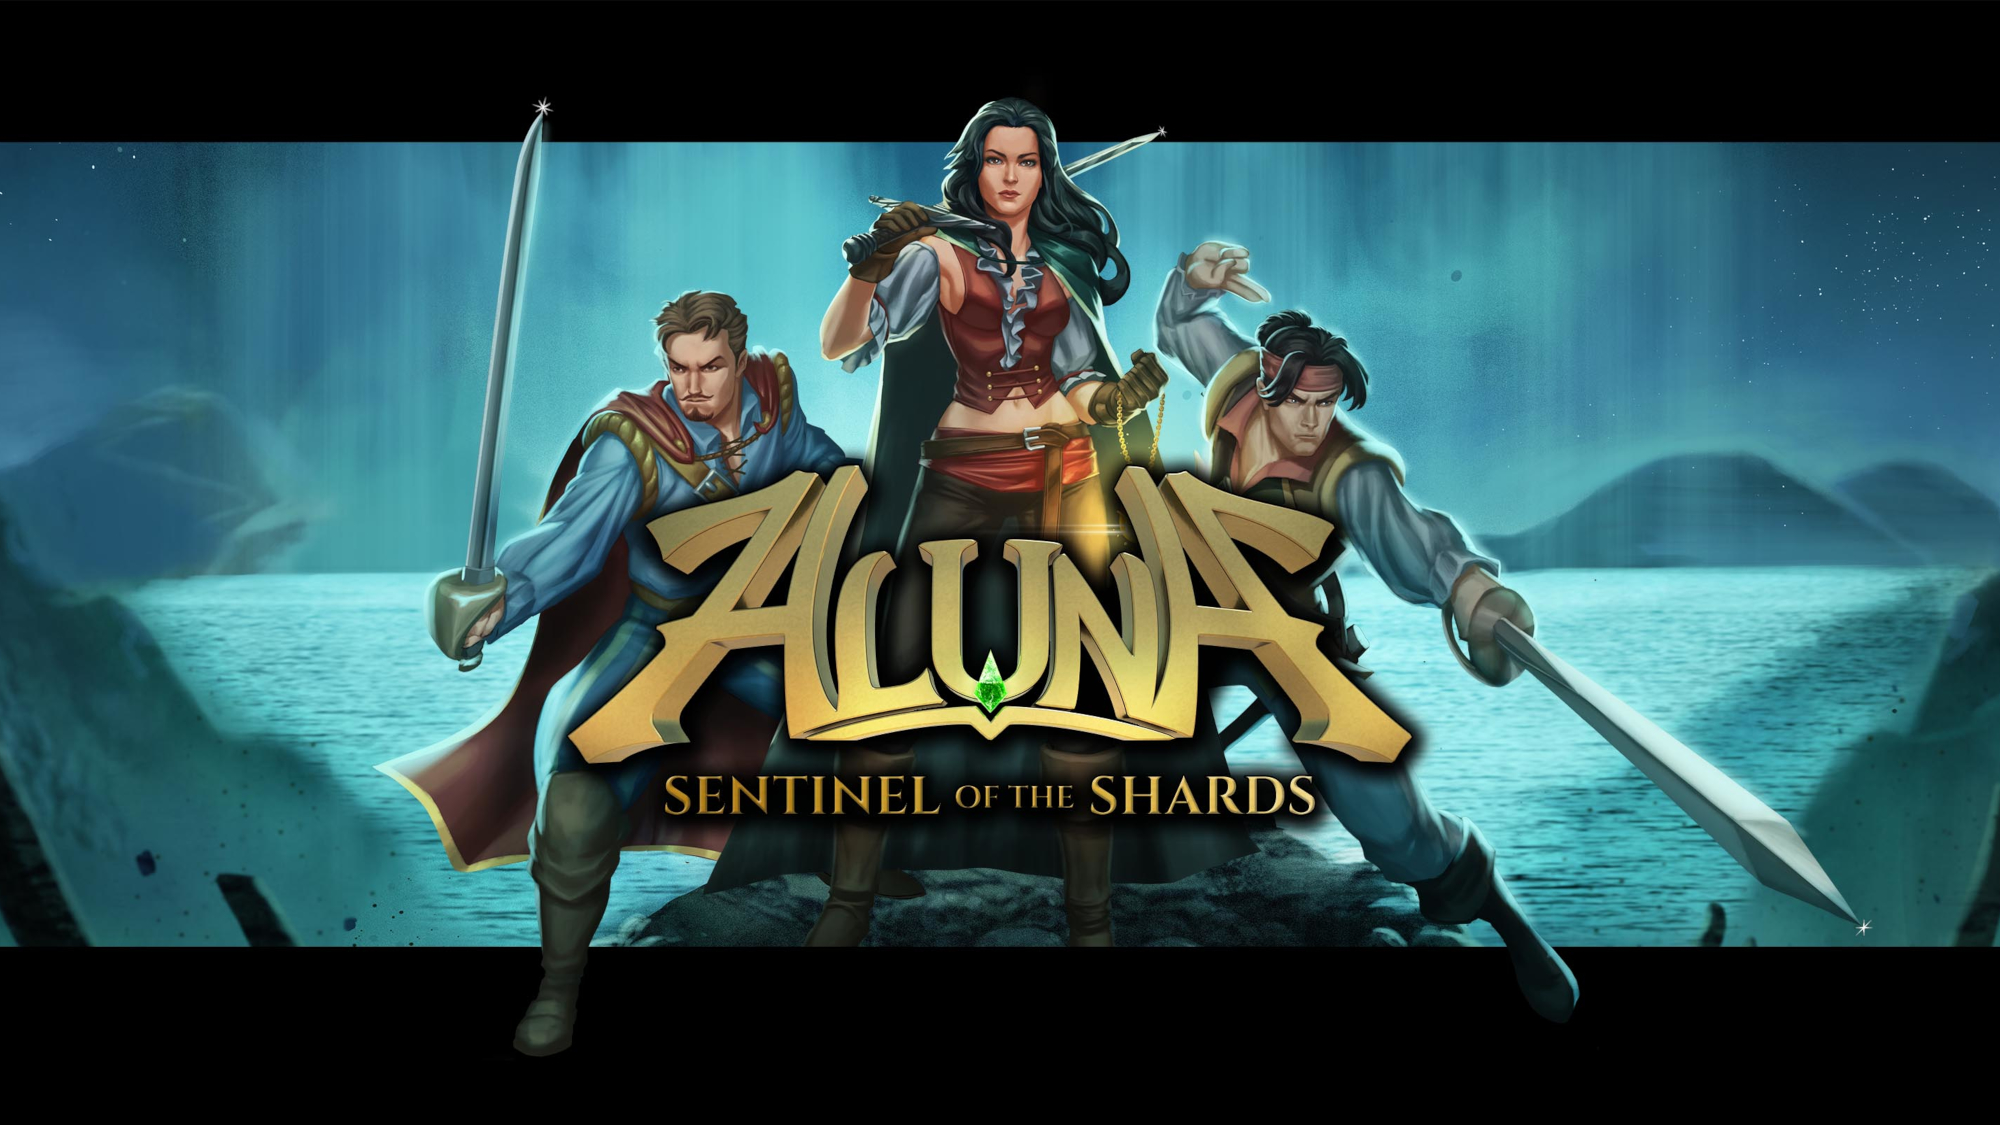 Video Game Aluna: Sentinel of the Shards HD Wallpaper | Background Image